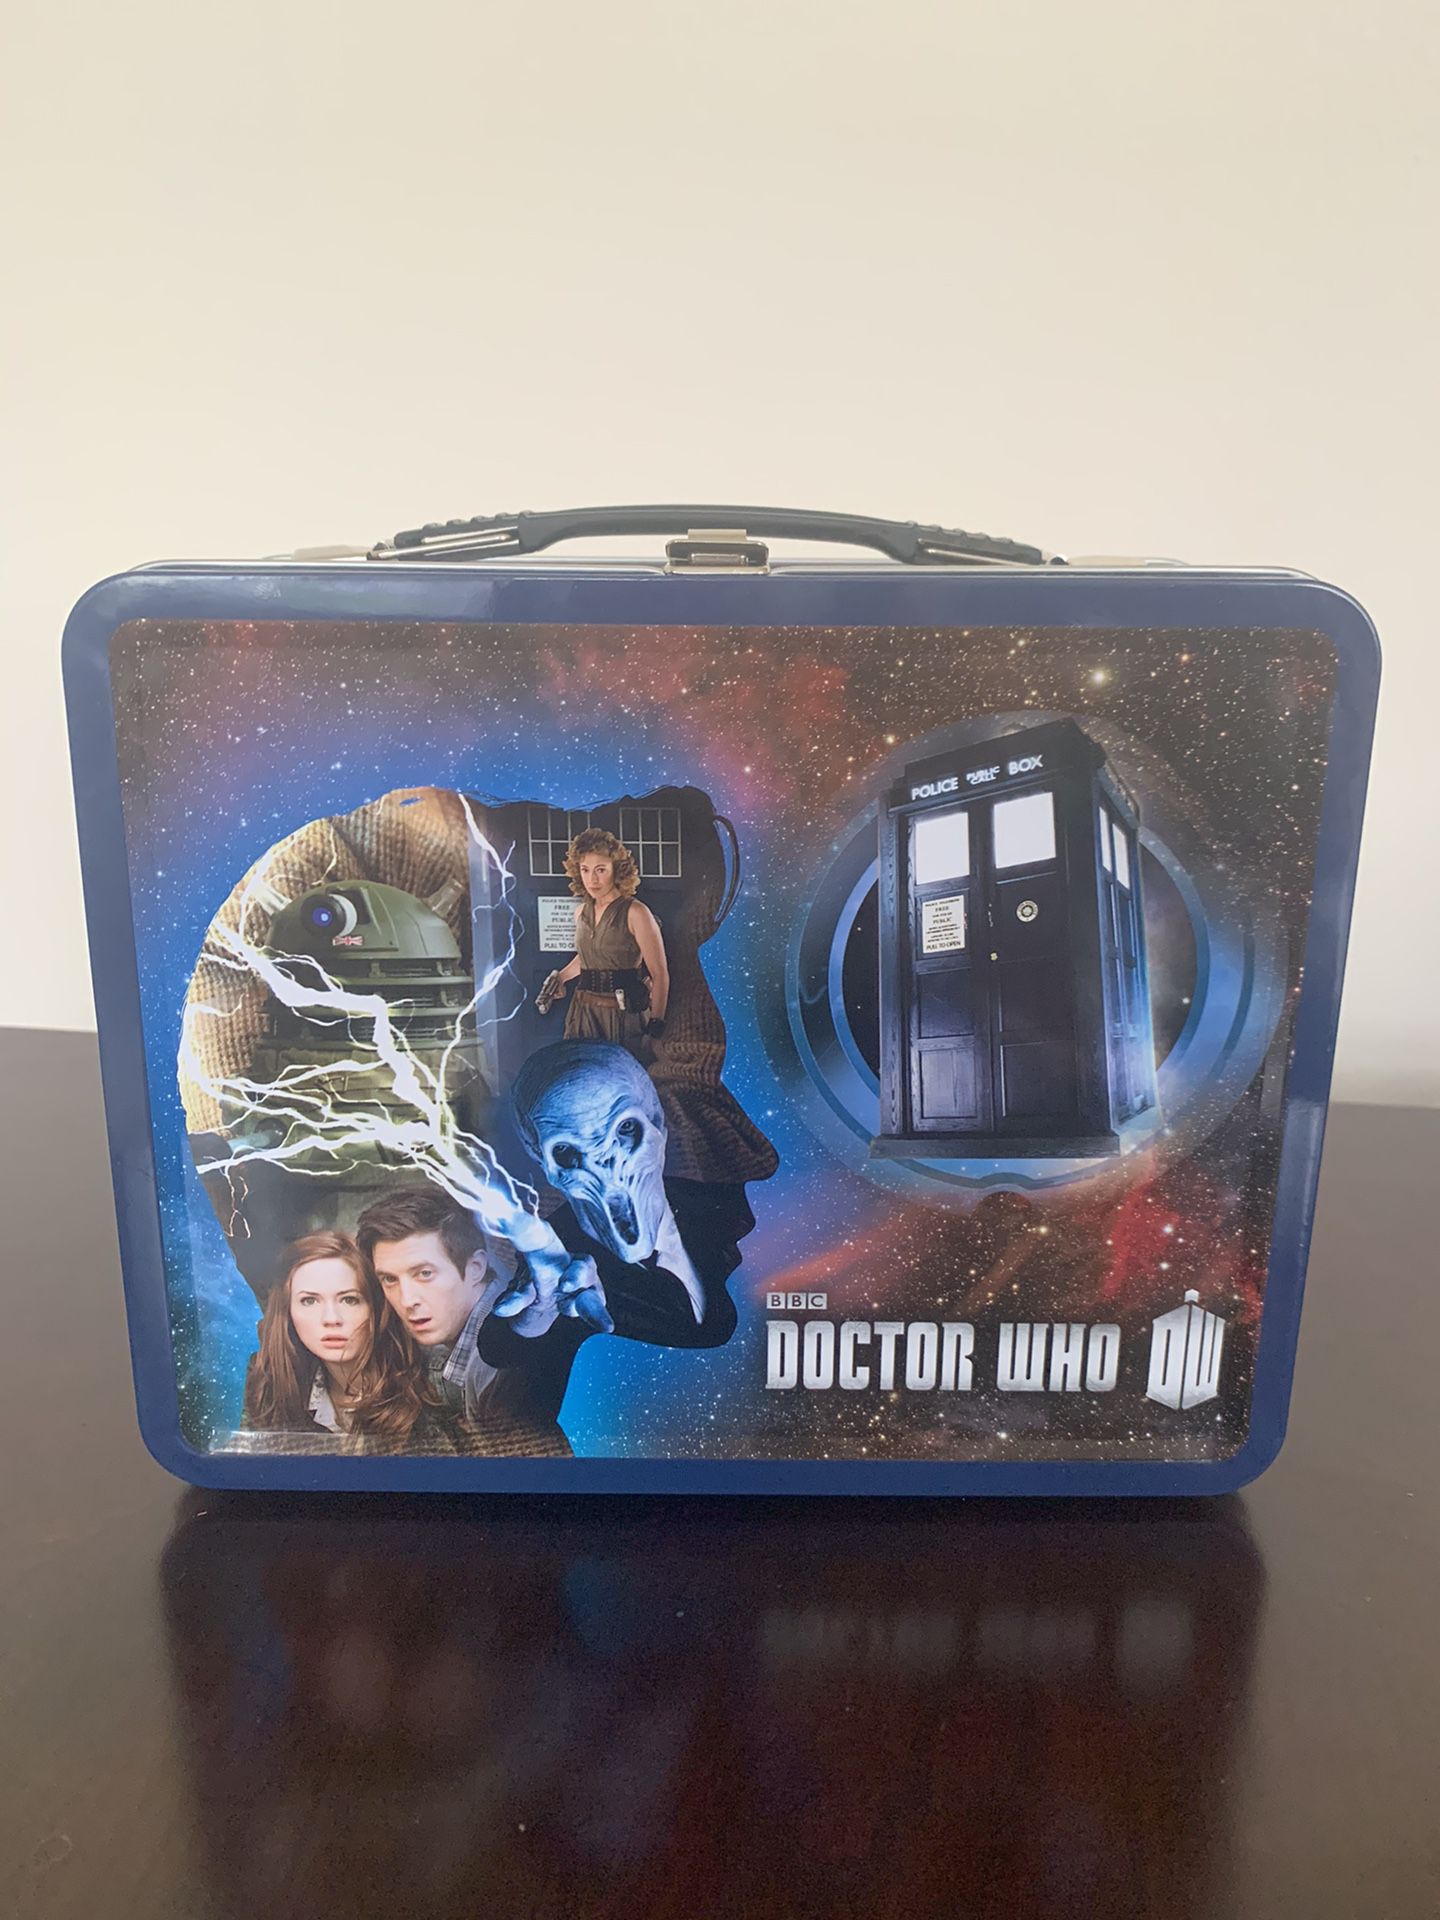 Doctor Who 1st and 11th Doctor Figures in Tin Tote - 50th anniversary Lunch Box